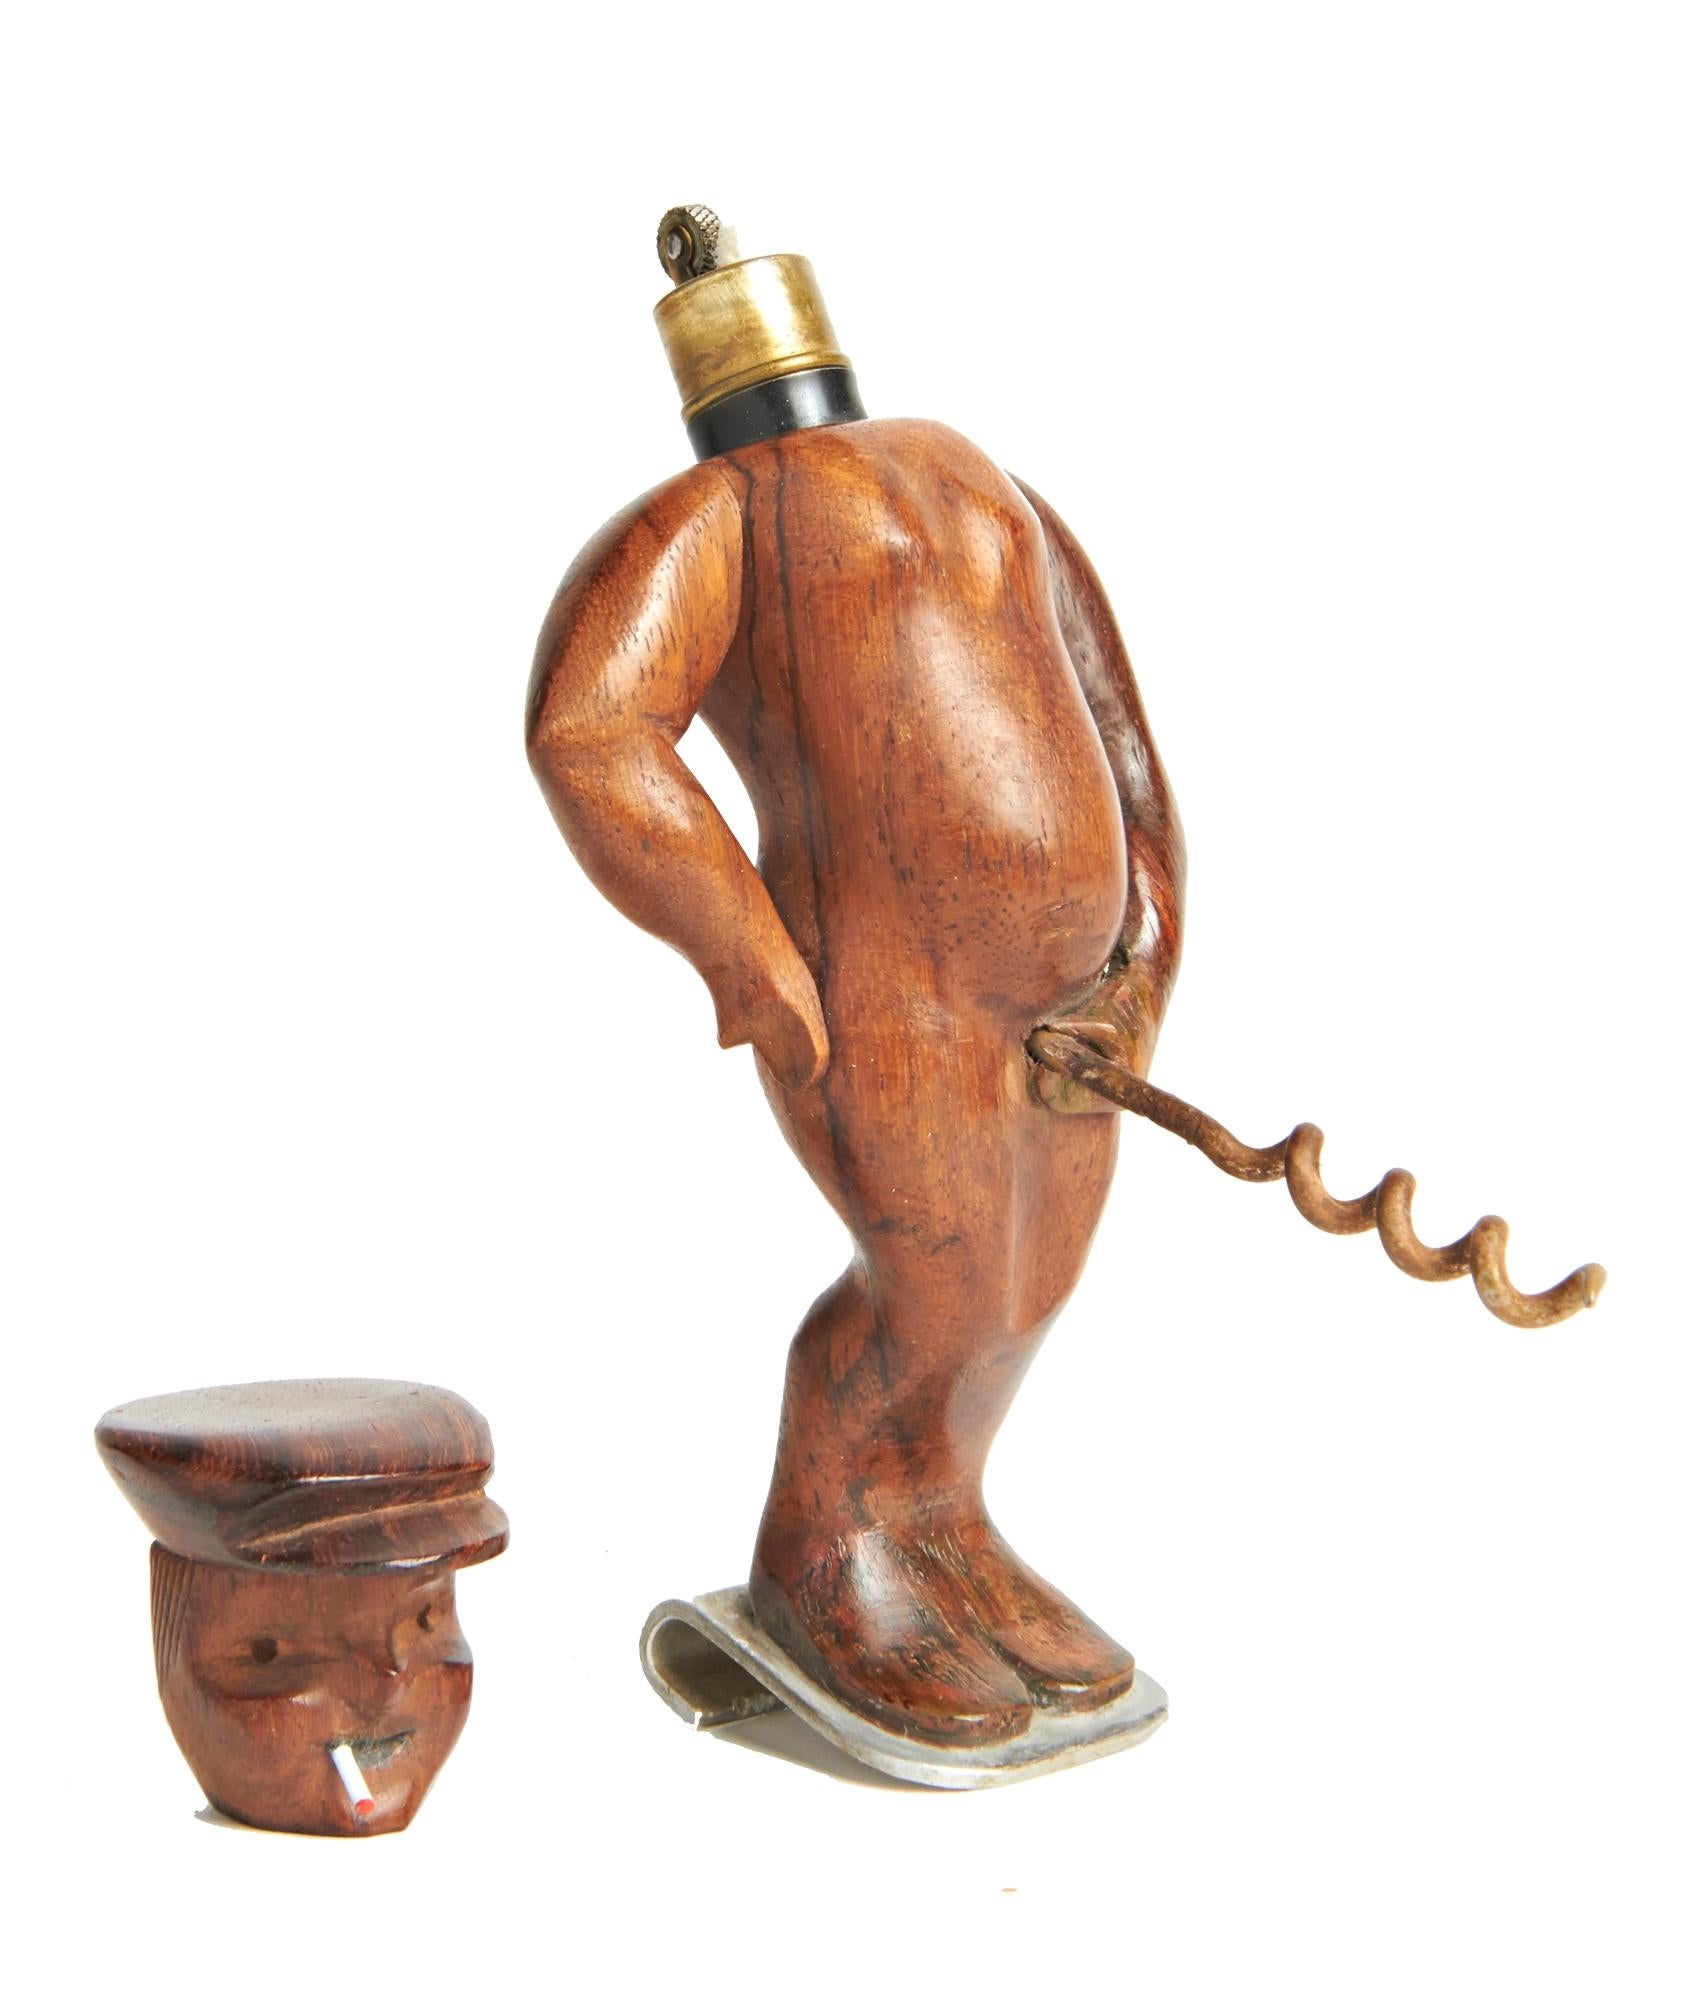 This delightfully naughty French combination aluminum bottle-opener, steel corkscrew and brass wheel and flint table lighter is hand carved from the beautifully grained wood of a grapevine. The figure stands on an aluminum curved bottle-opener base,